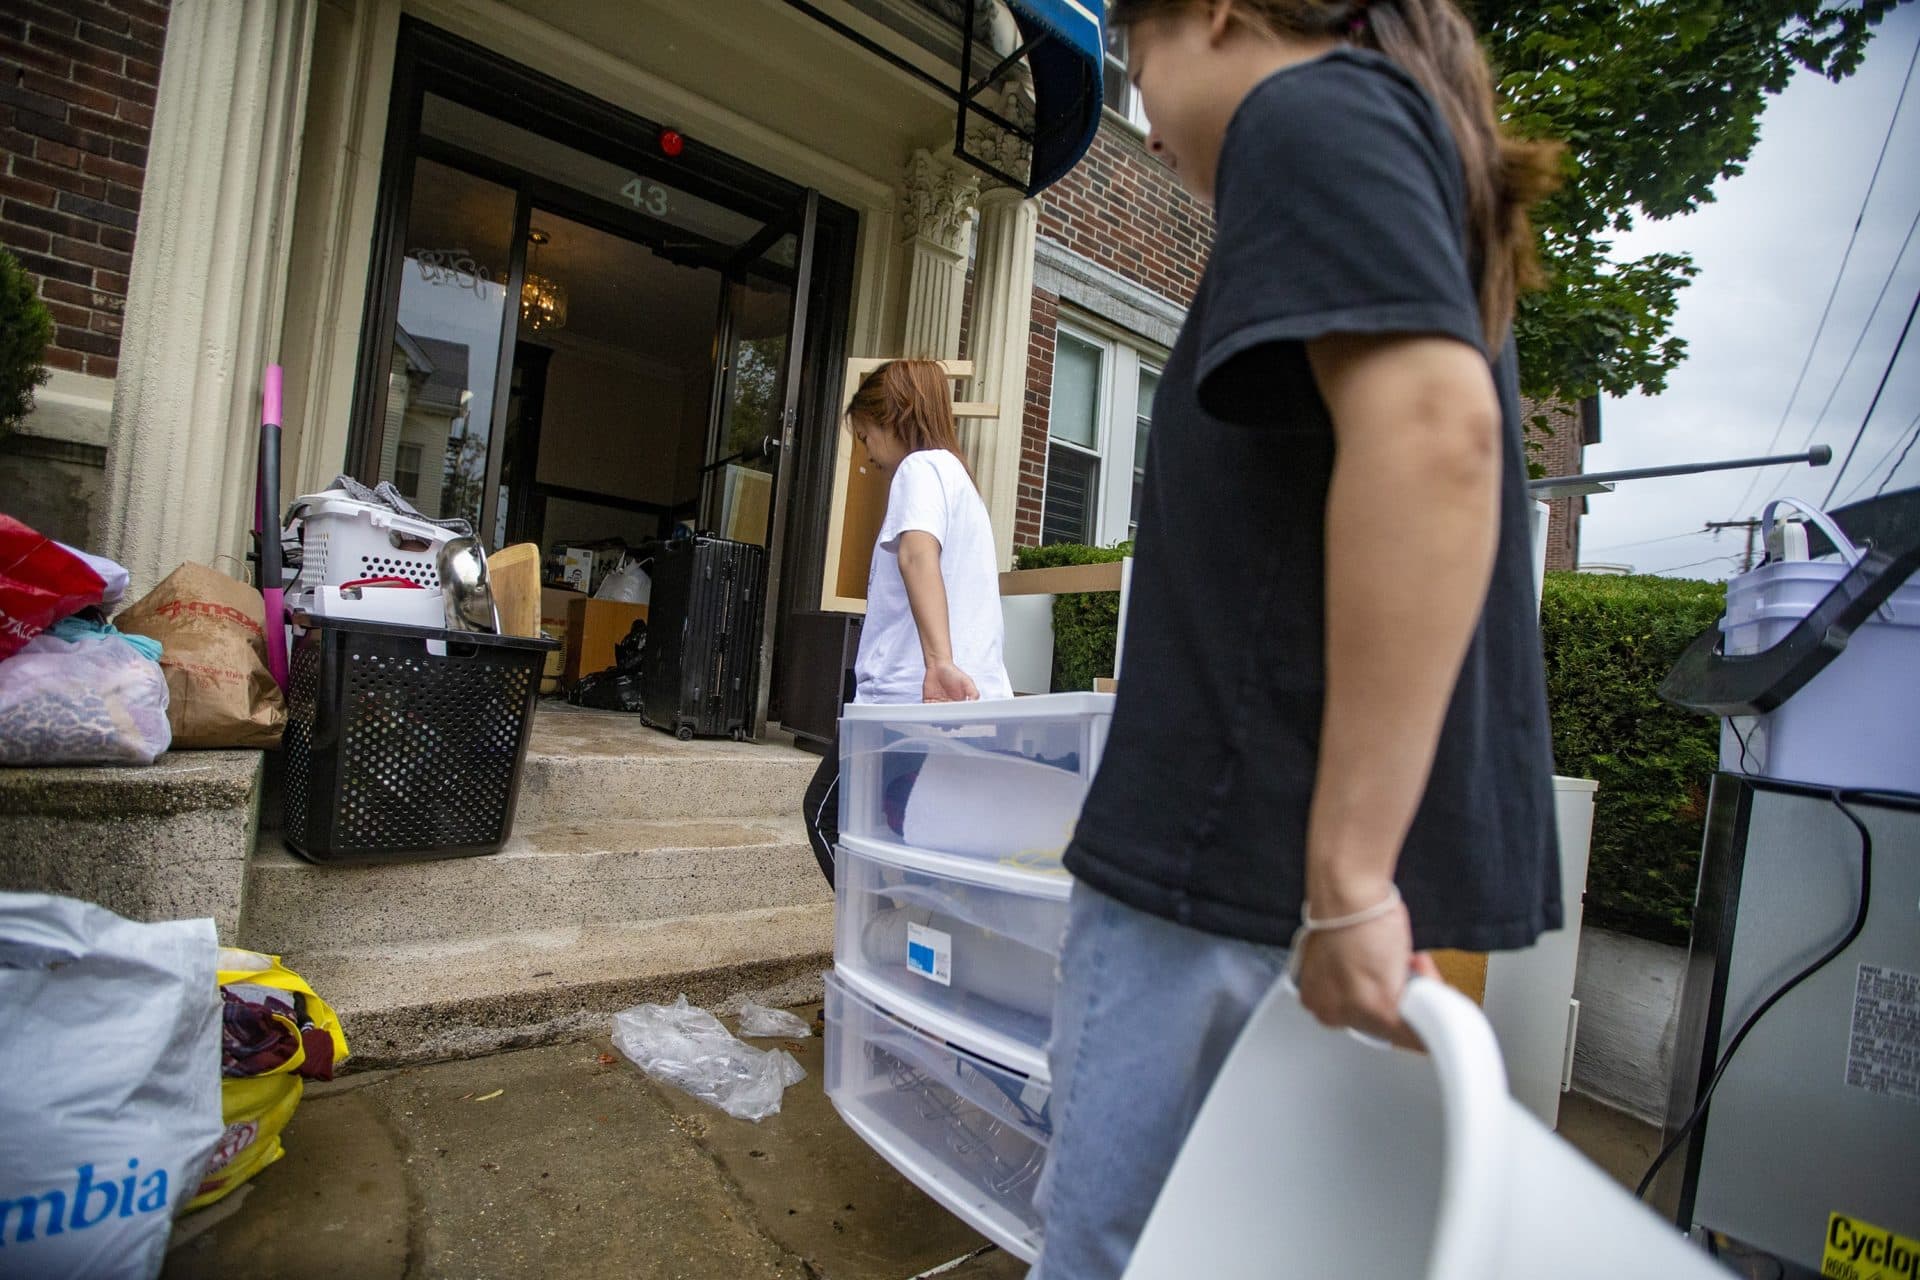 Two people move belongings into a building on Linden Street in Allston on Sept. 1. (Jesse Costa/WBUR)